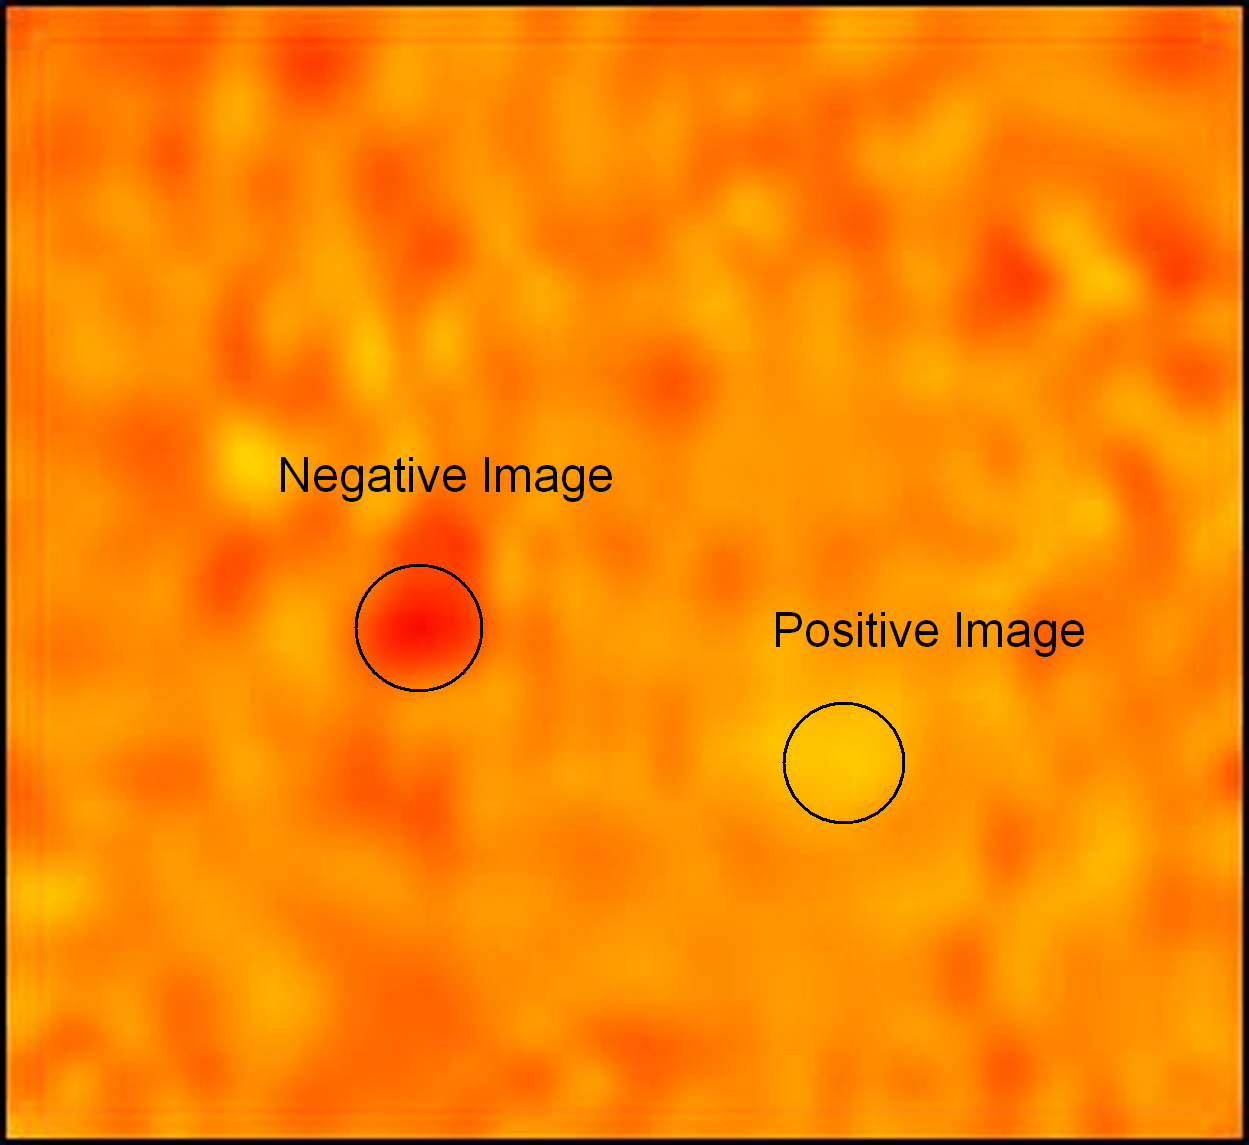 Beating the confusion limit for Solar System Objects. This SPIRE image of Makemake uses the technique of subtracting the background using the shift in position between two epochs and subtracting one frame from the other. The trans-Neptunian Object (TNO) Makemake has an estimated flux of 15mJy at 250 microns, with a confusion noise sigma of 6mJy. A weak, but clear detection is obtained in this image with 15 repetitions (NB: the confusion noise is effectively reached in 2 repetitions). This is thought to be the faintest target to be detected with SPIRE.